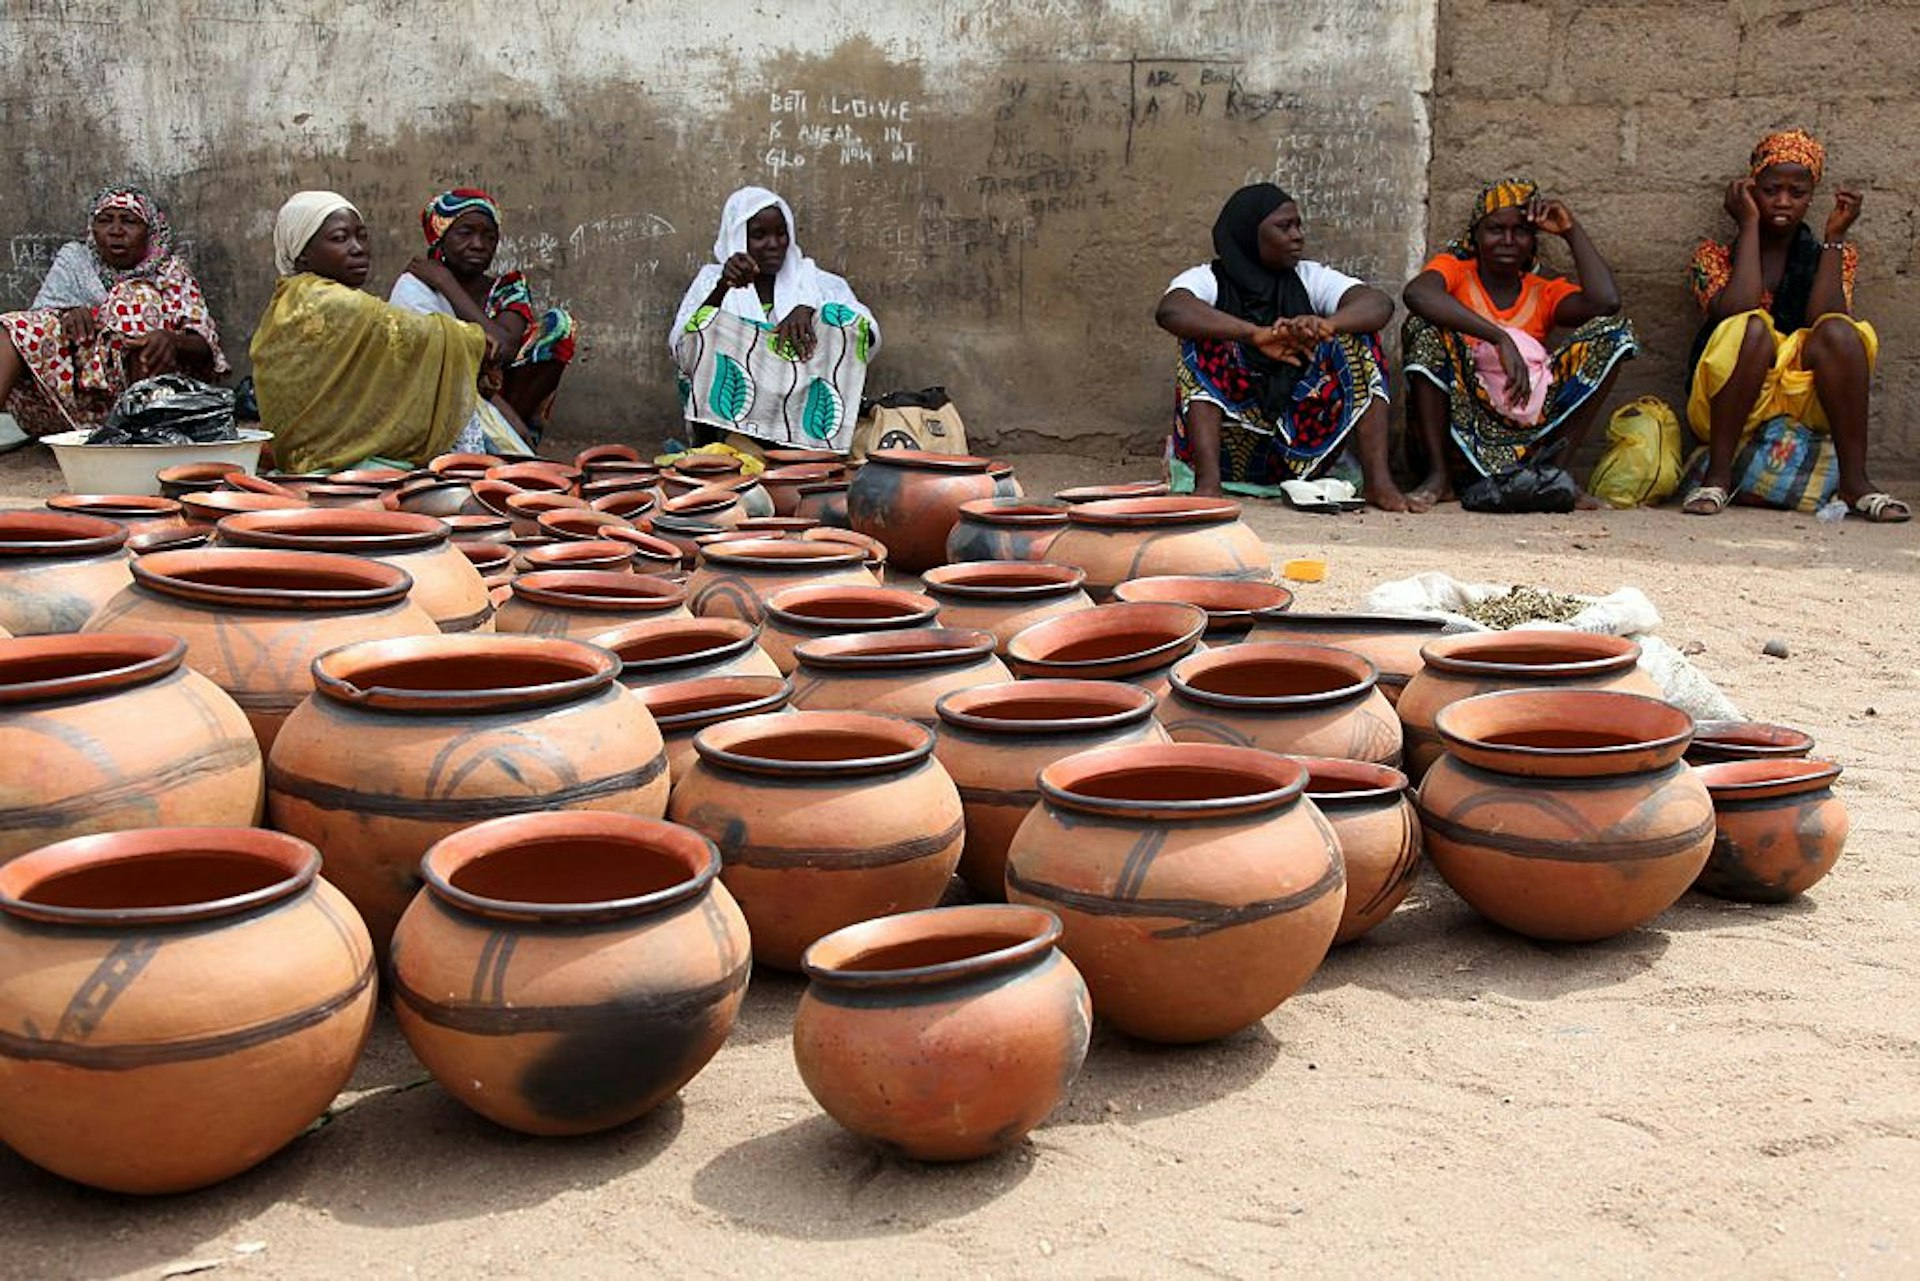 Nigerian women sit next to their pottery which is for sale at the weekly Yola market